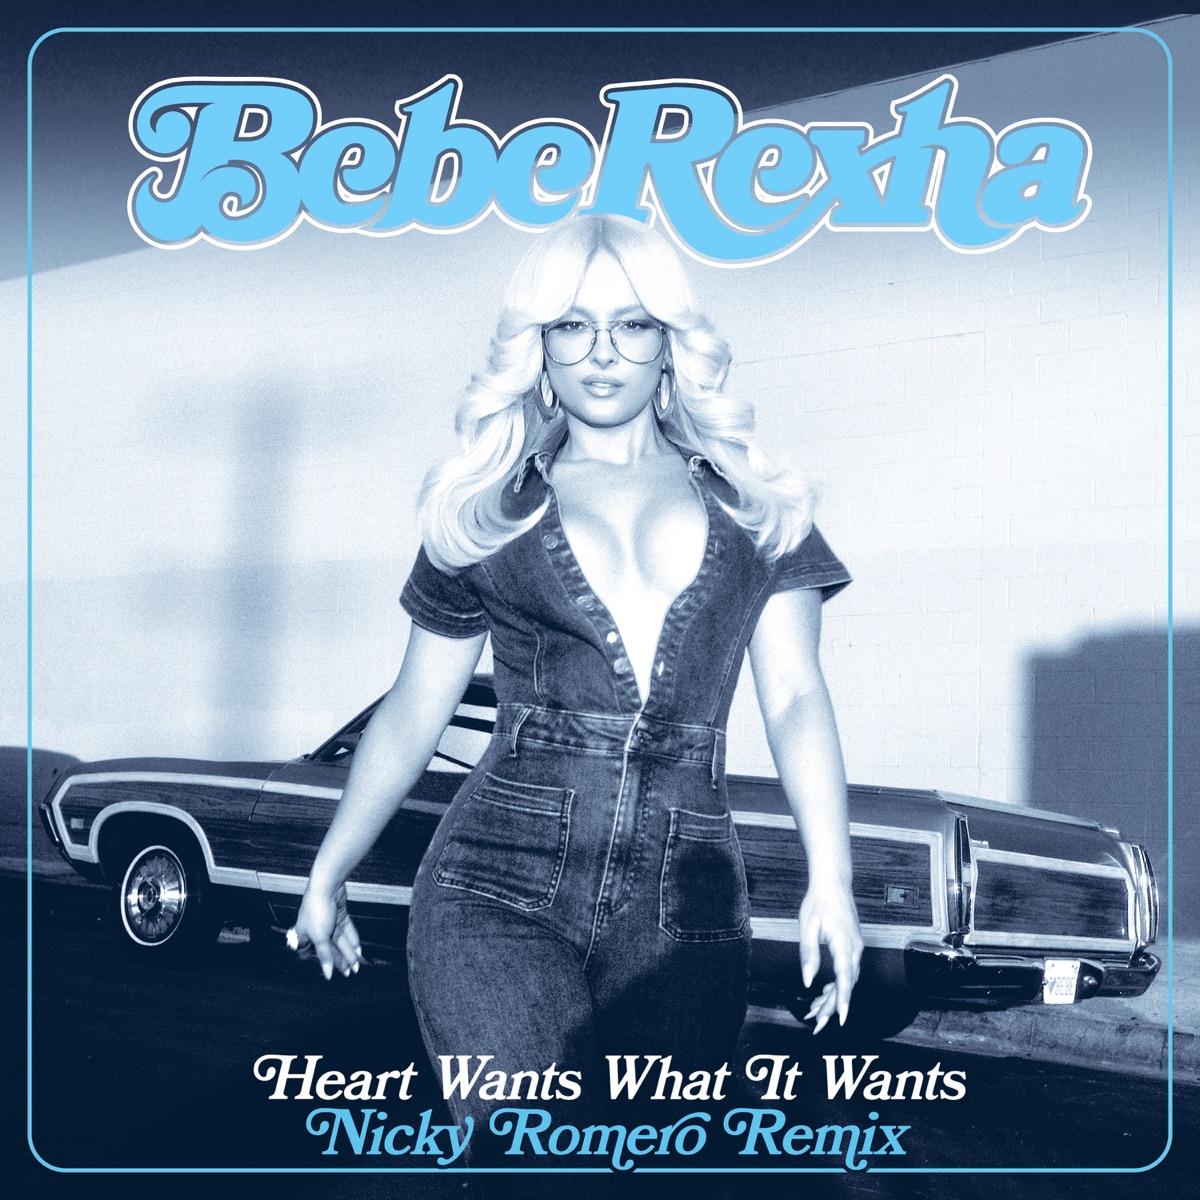 Song Review: &Quot;Heart Wants What It Wants&Quot; (Nicky Romero Remix) By Bebe Rexha 1